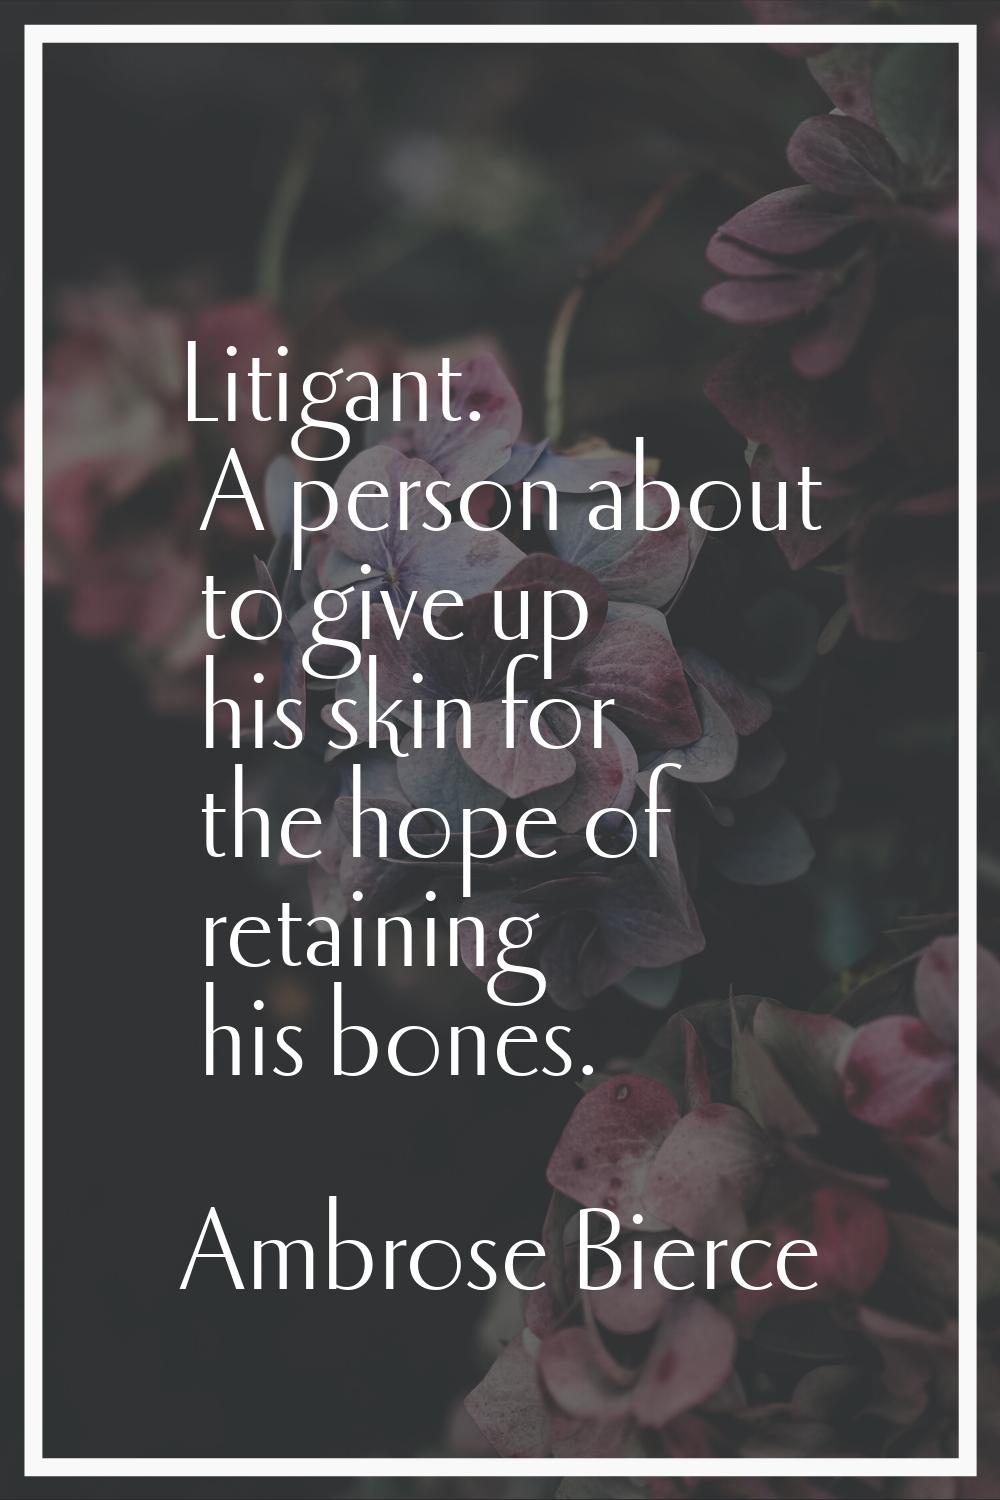 Litigant. A person about to give up his skin for the hope of retaining his bones.